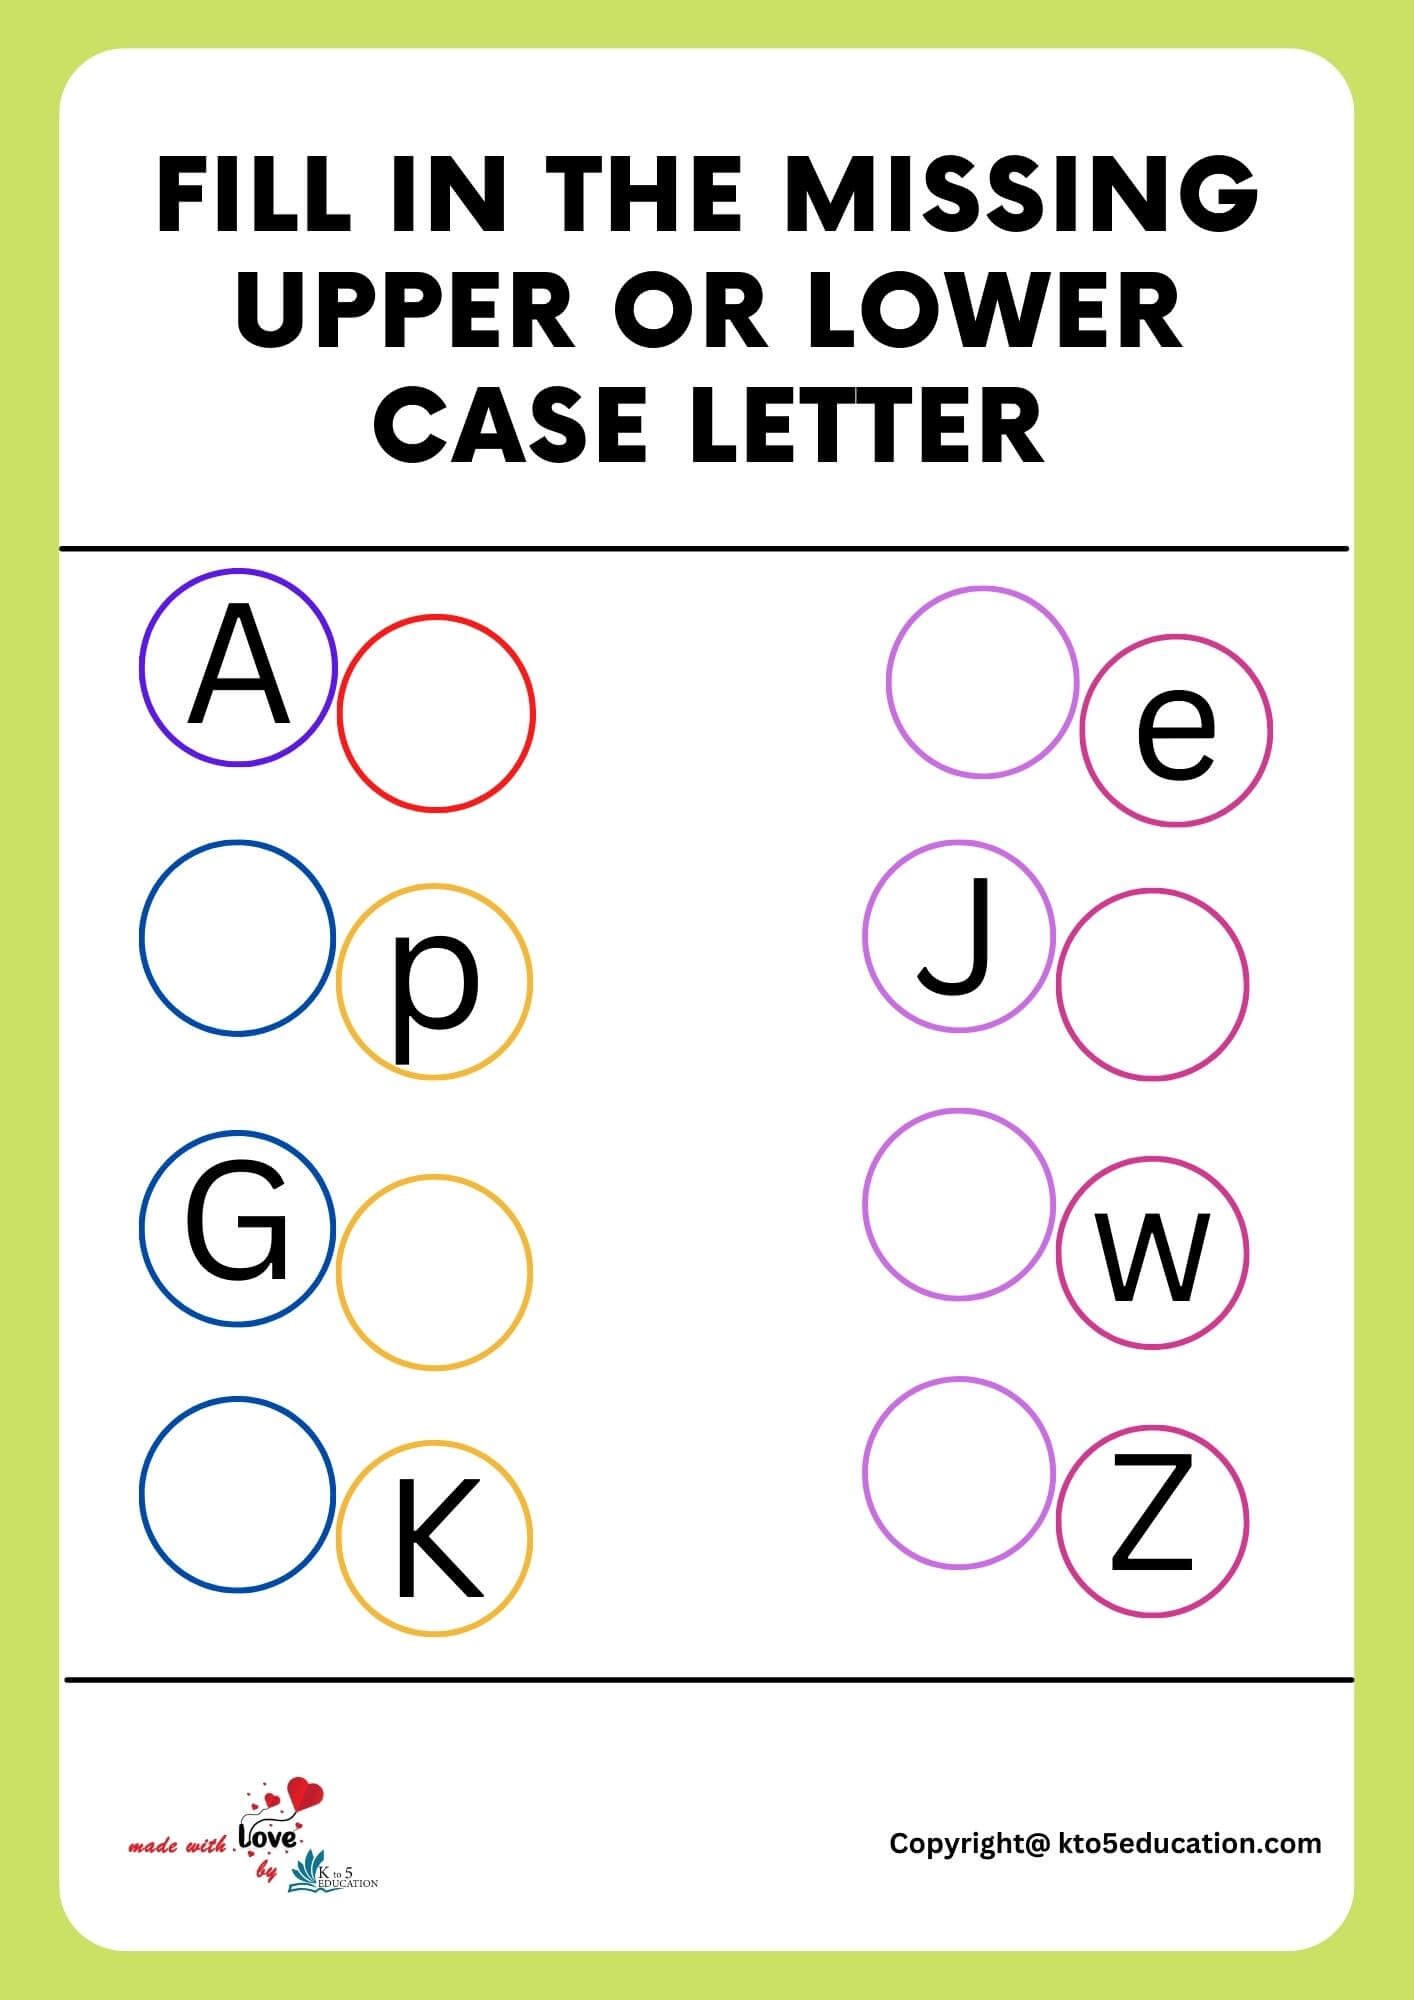 Fill In The Missing Upper or lower Case Letter